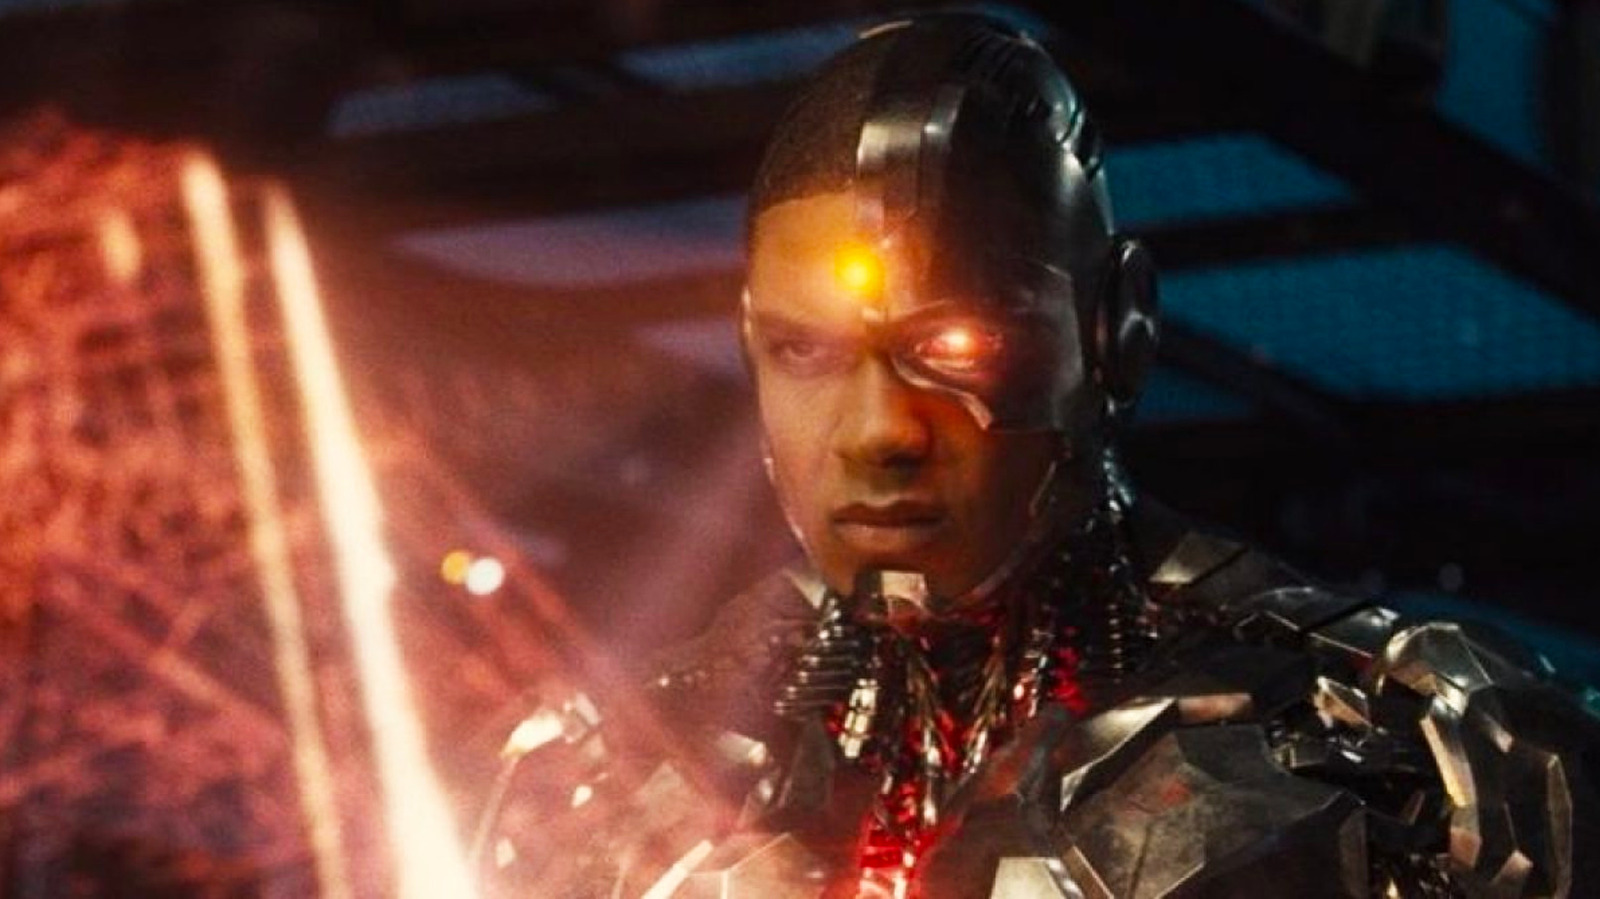 Joss Whedon Says Justice League's Cyborg Storyline 'Made No Sense,' Calls Ray Fisher 'A Bad Actor'